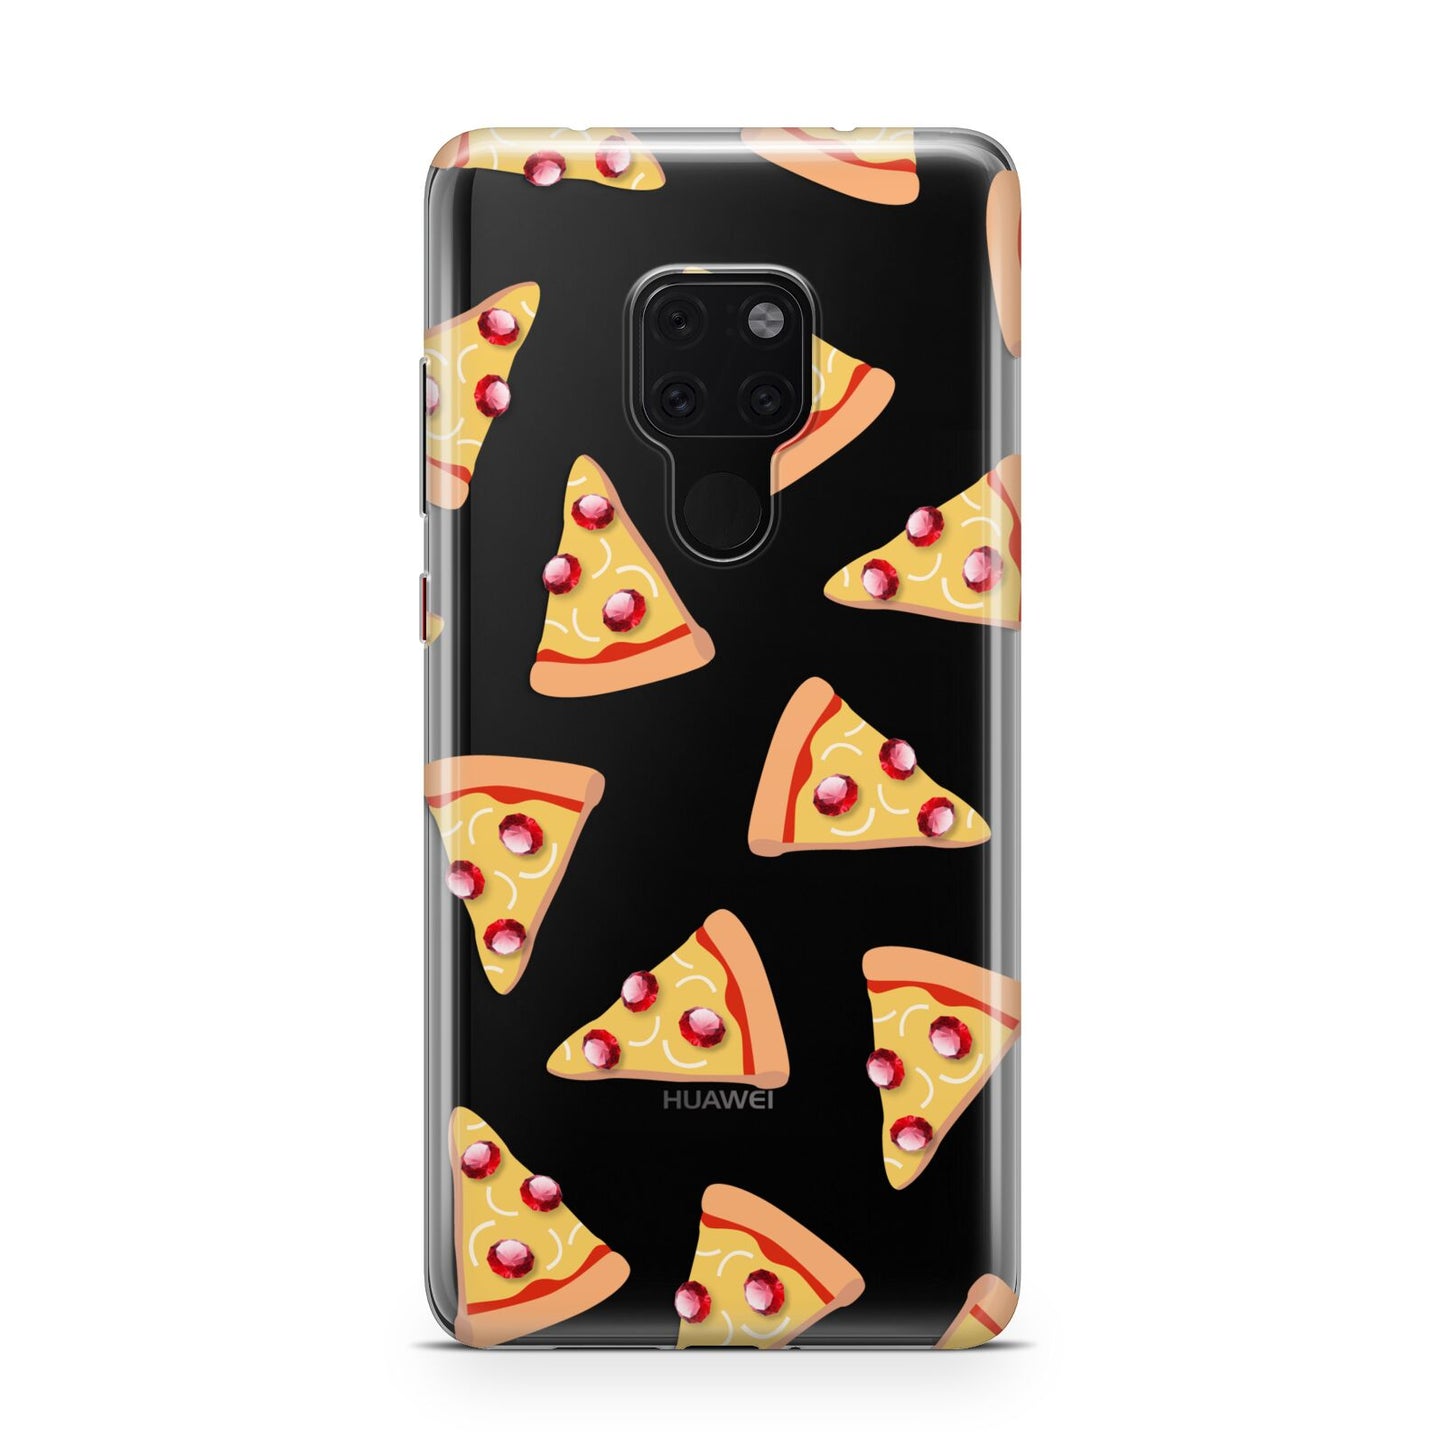 Rubies on Cartoon Pizza Slices Huawei Mate 20 Phone Case